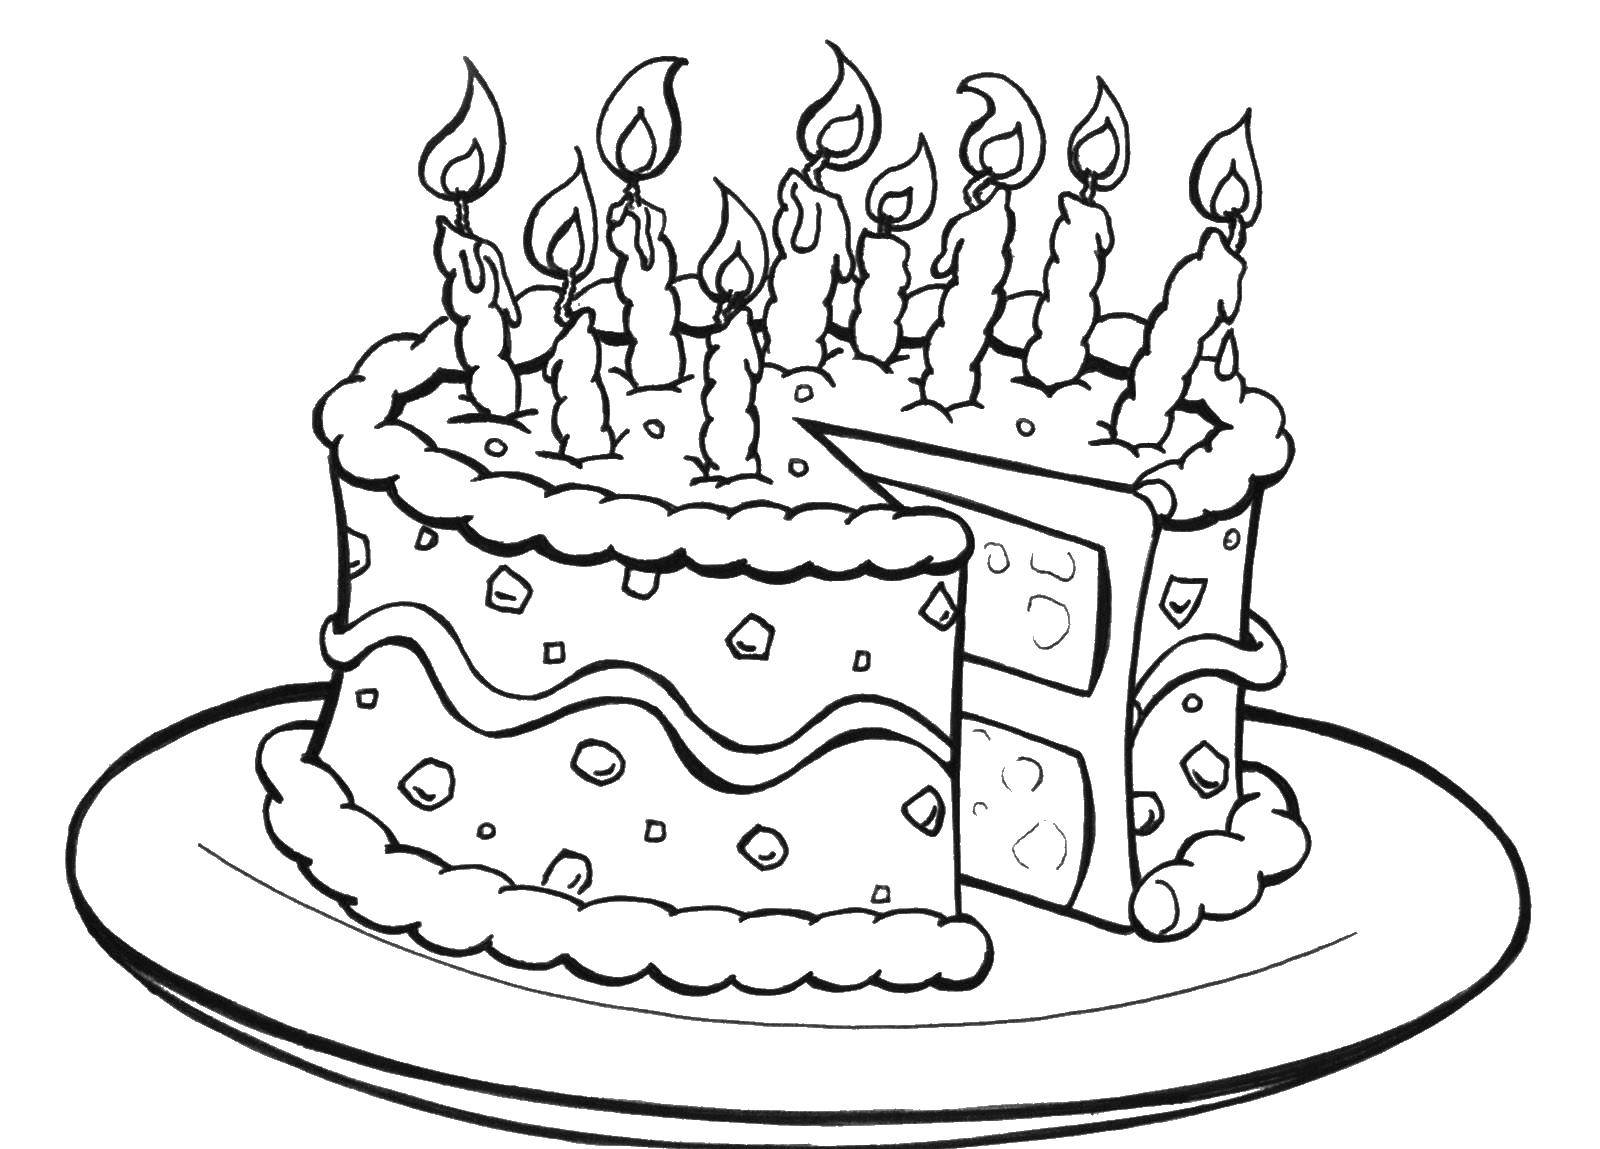 Coloring Candles in the cake. Category cakes. Tags:  Torah , prazdnik.